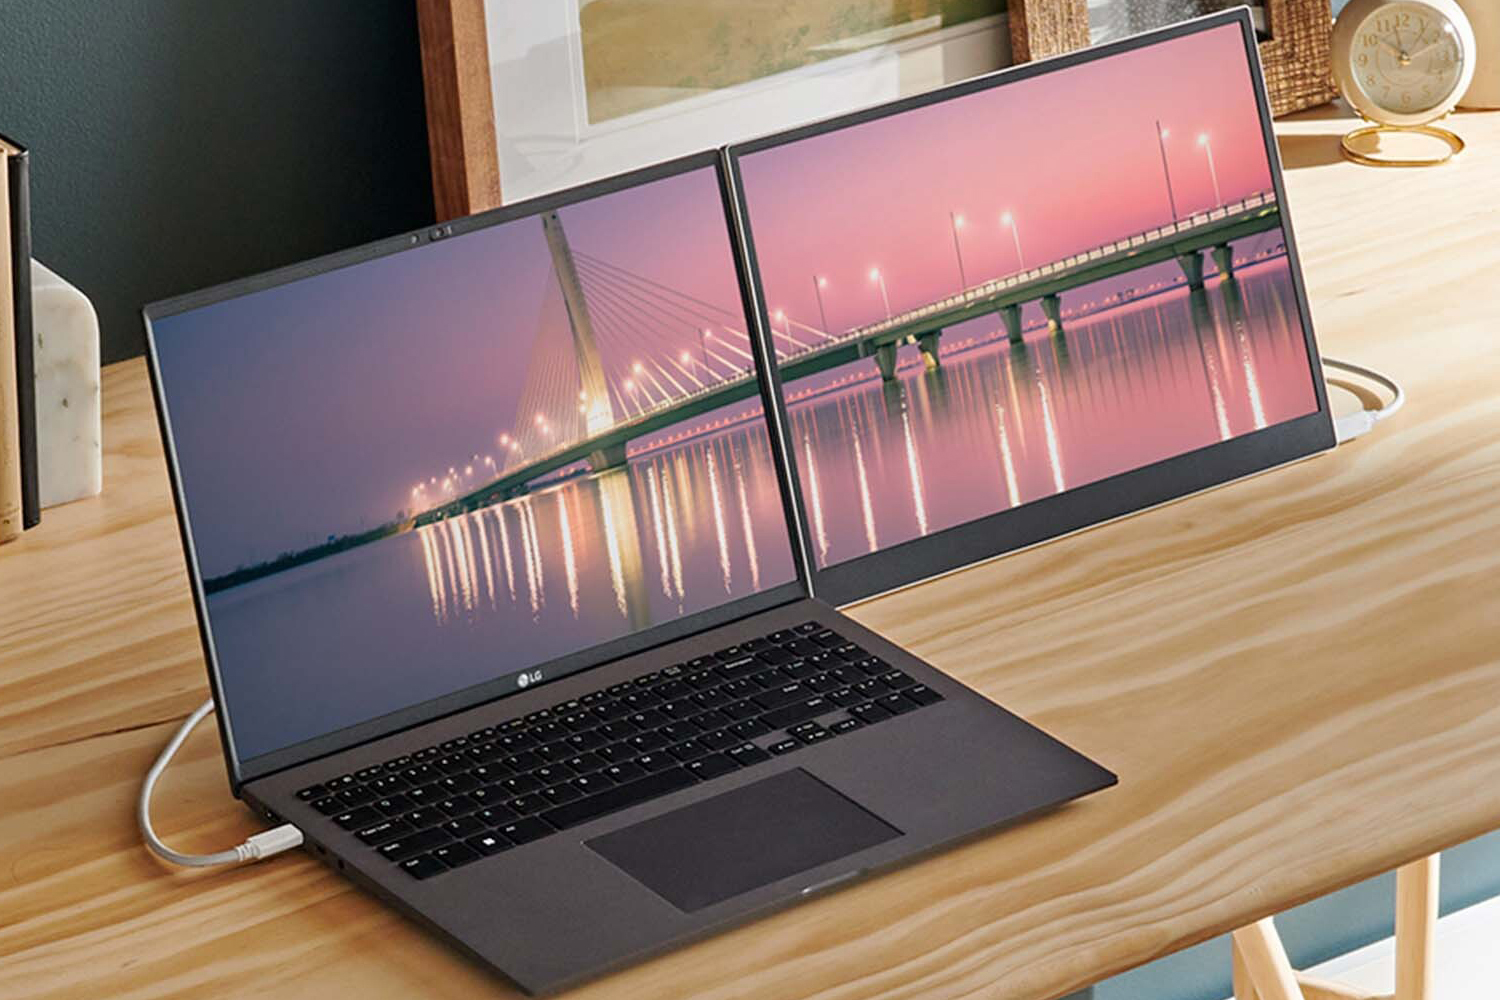 Buy an LG Gram laptop and get a portable monitor FREE